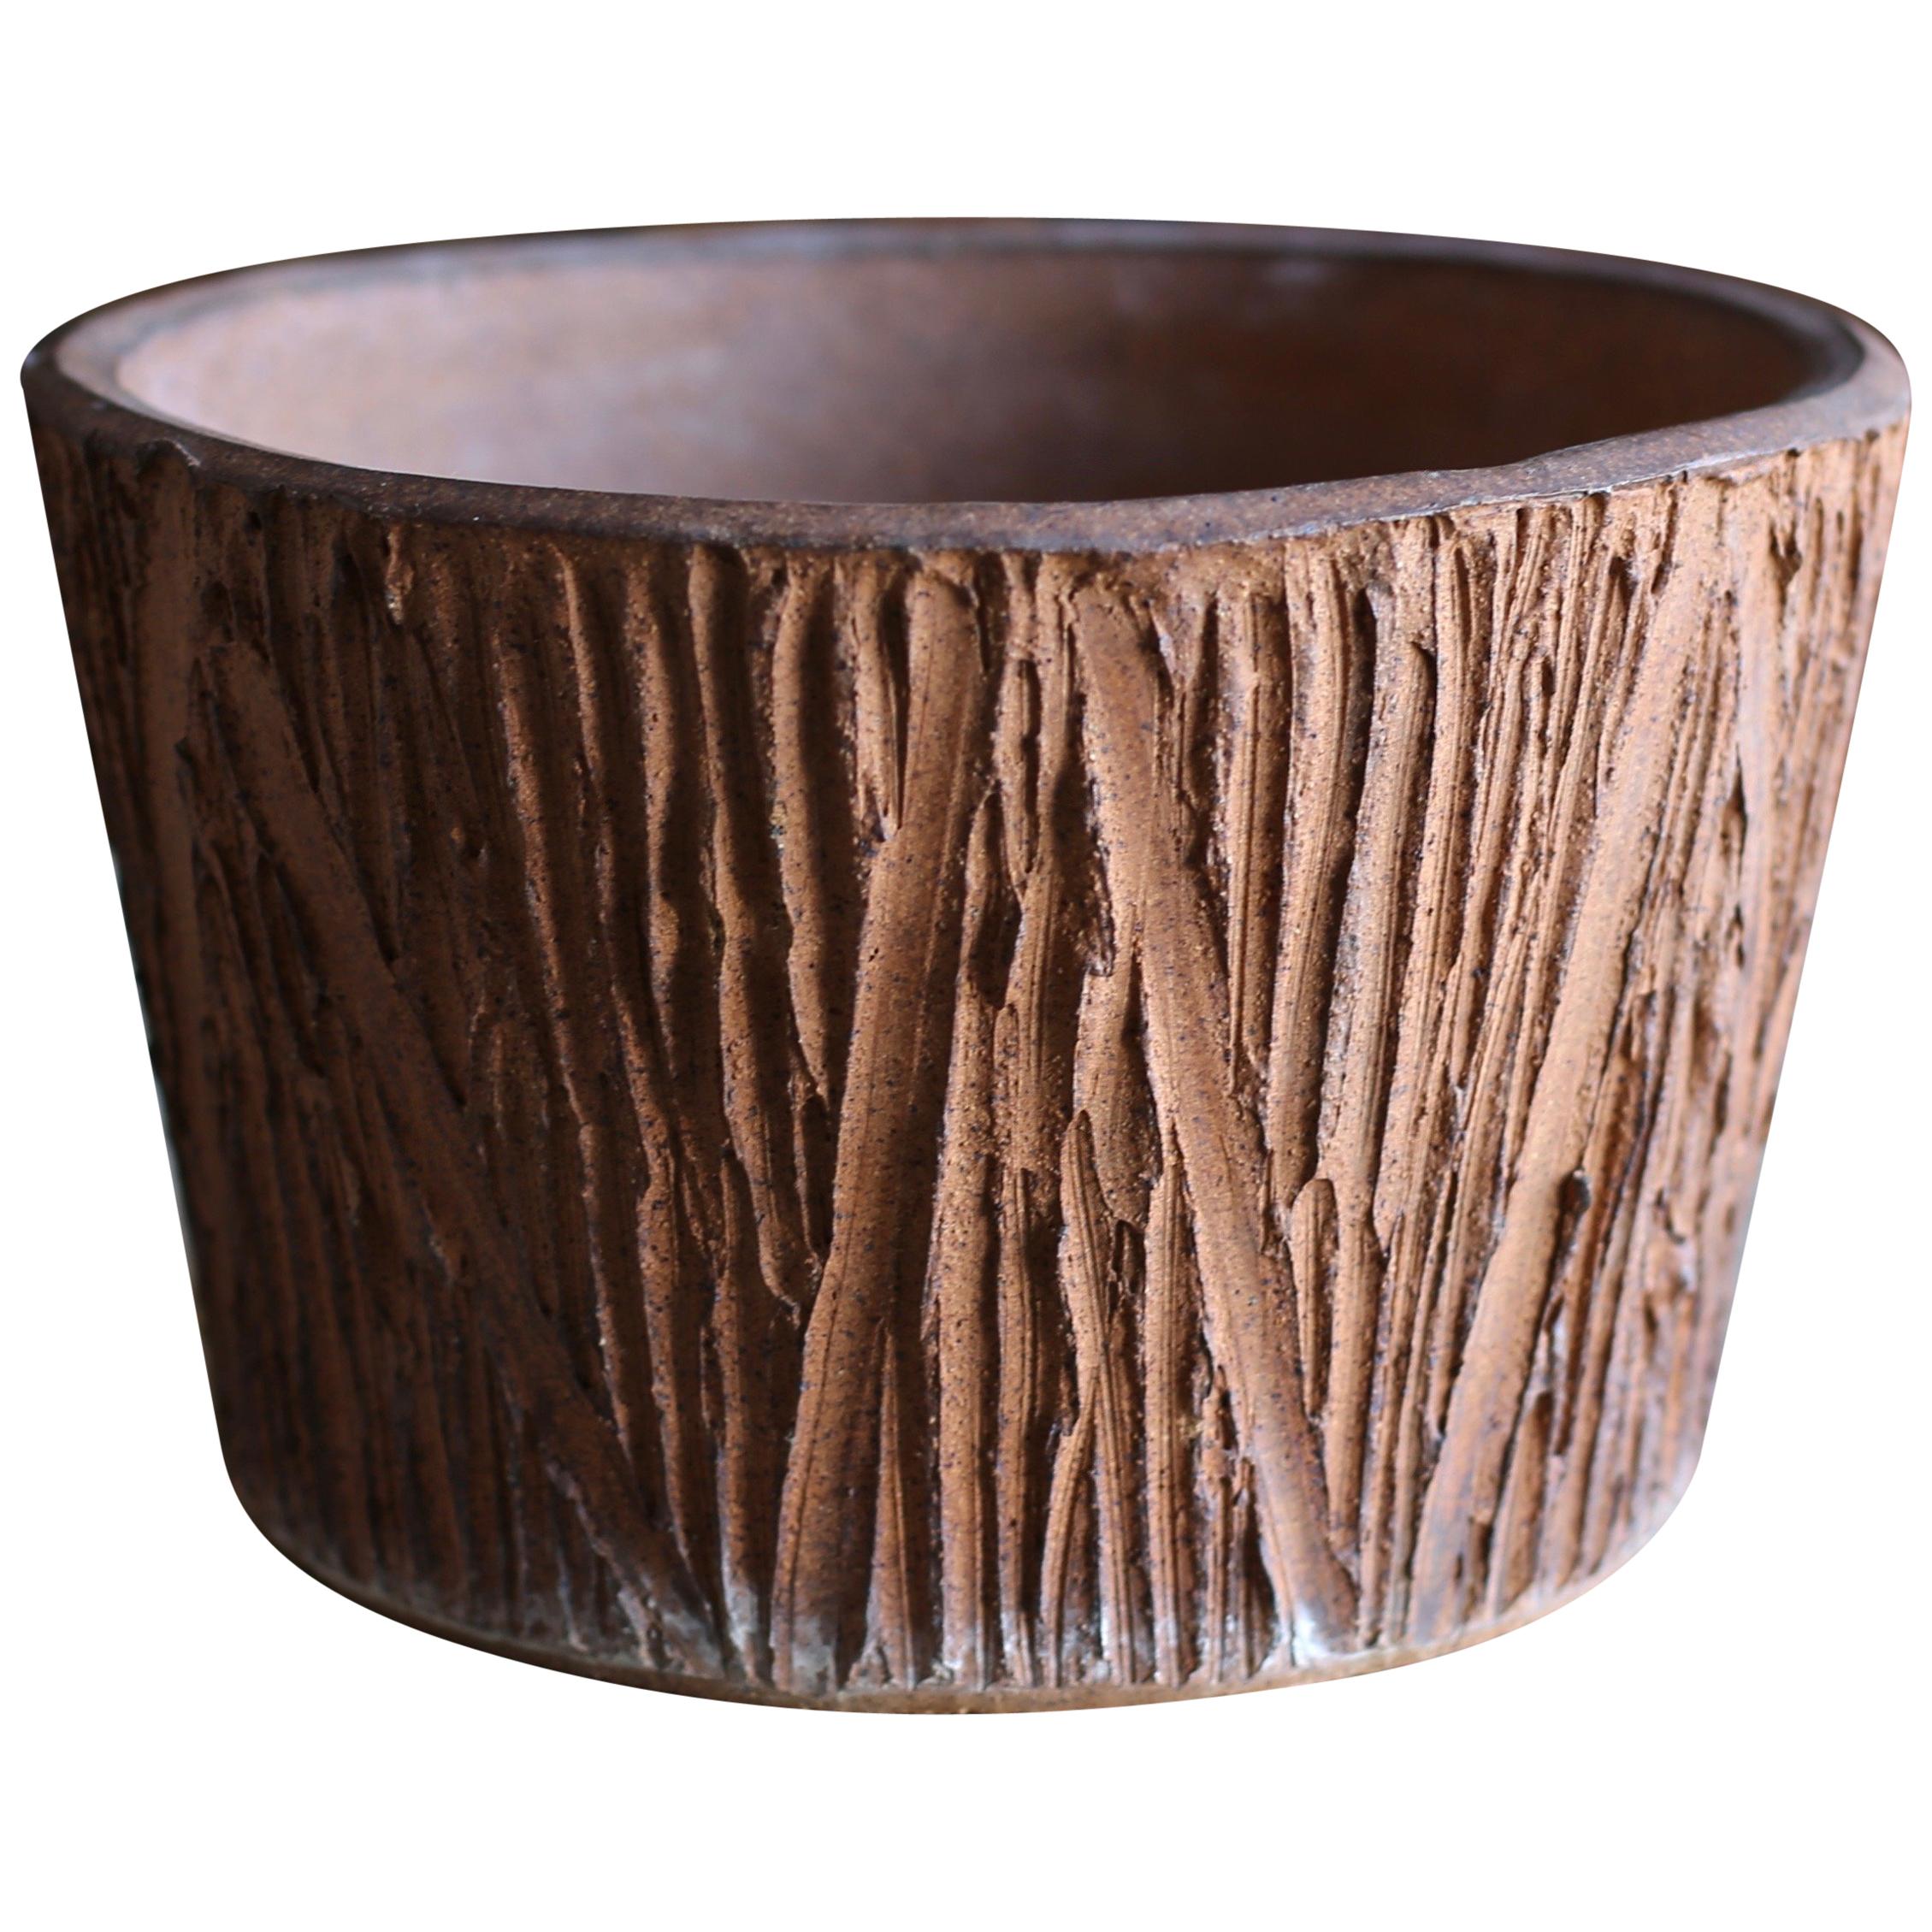 "Scratch" Pattern Planter by David Cressey for Architectural Pottery